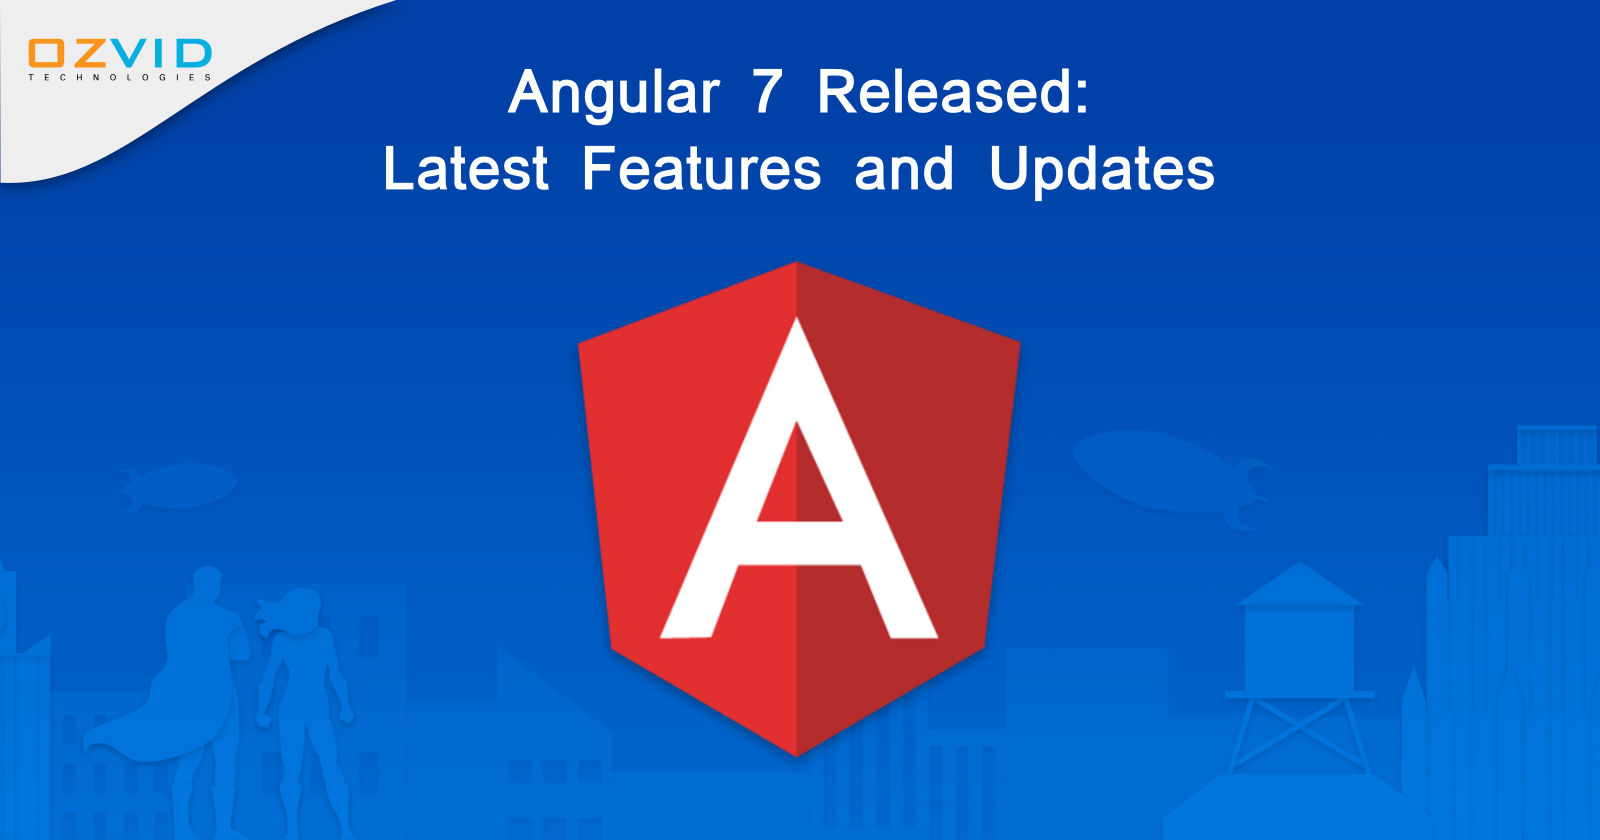 Angular 7 Released: Latest Features and Updates